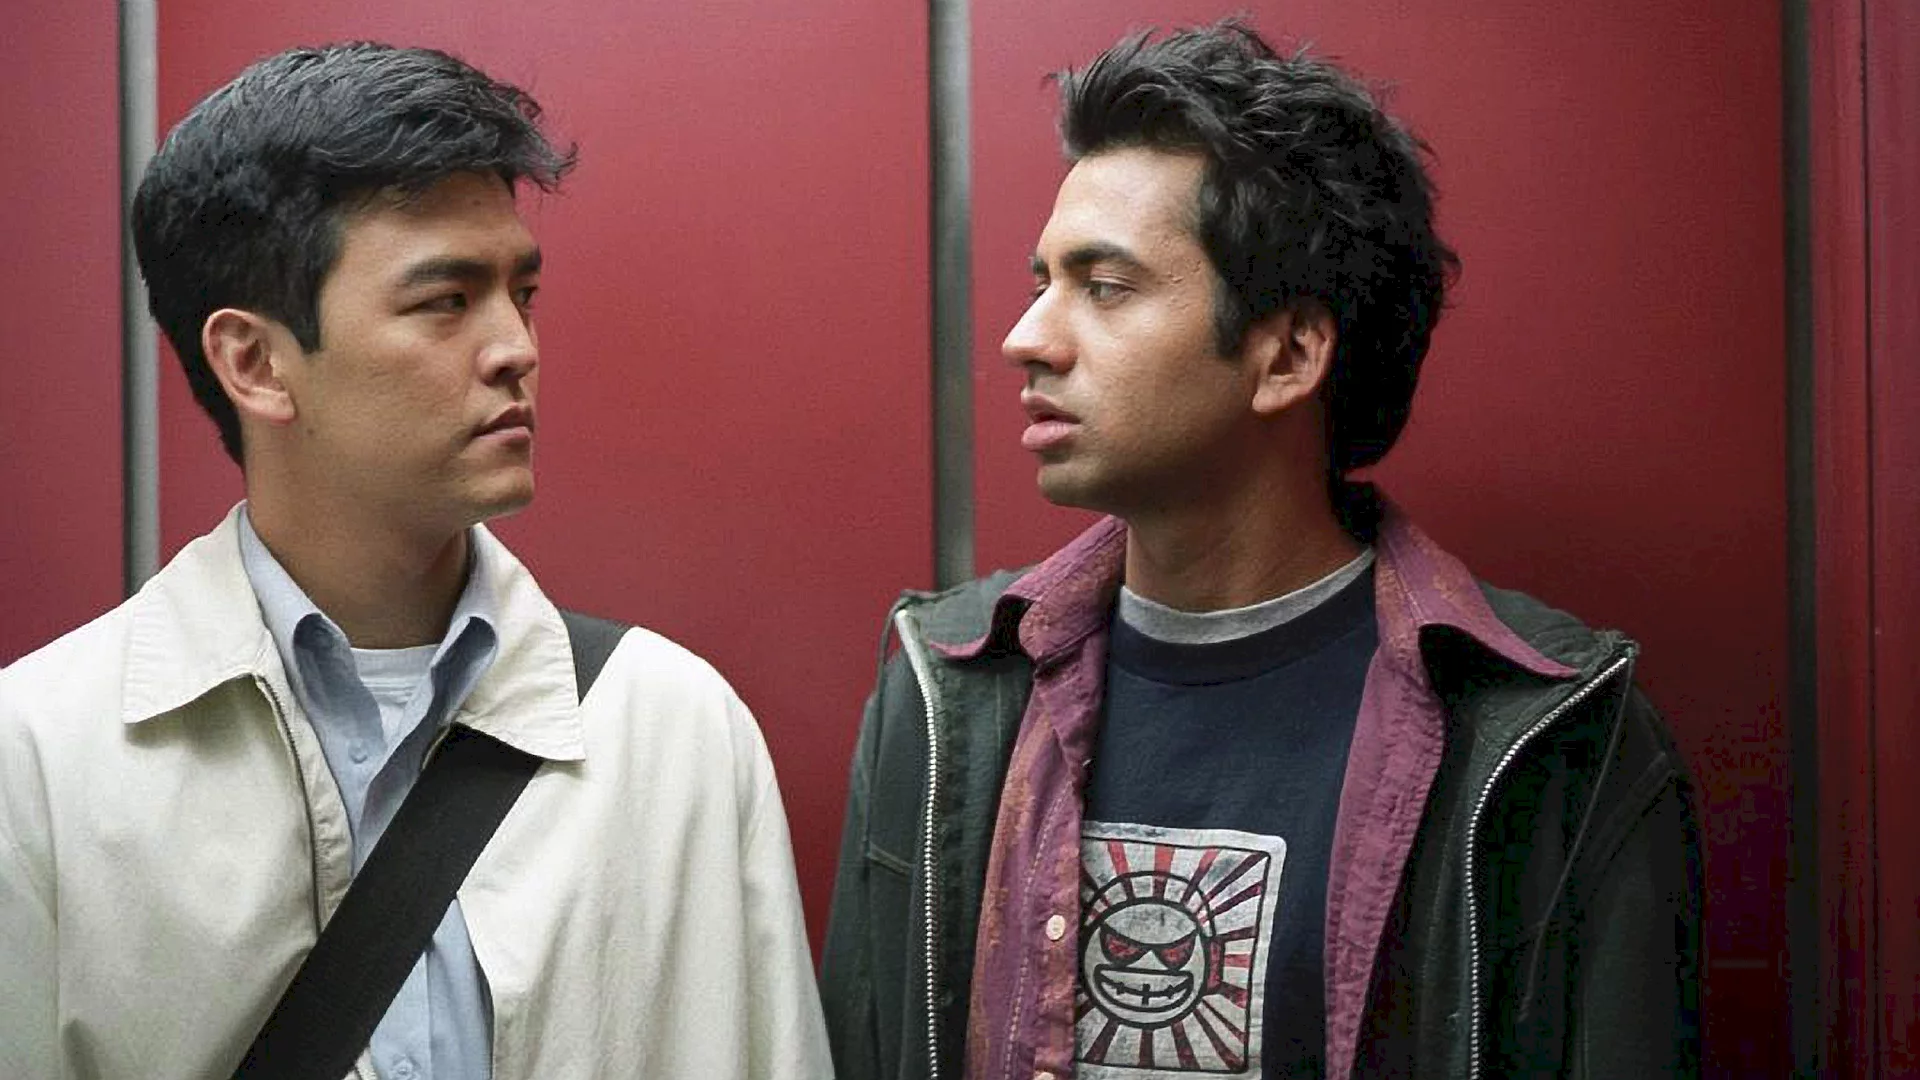 Photo 4 du film : Harold and kumar go to the white cast